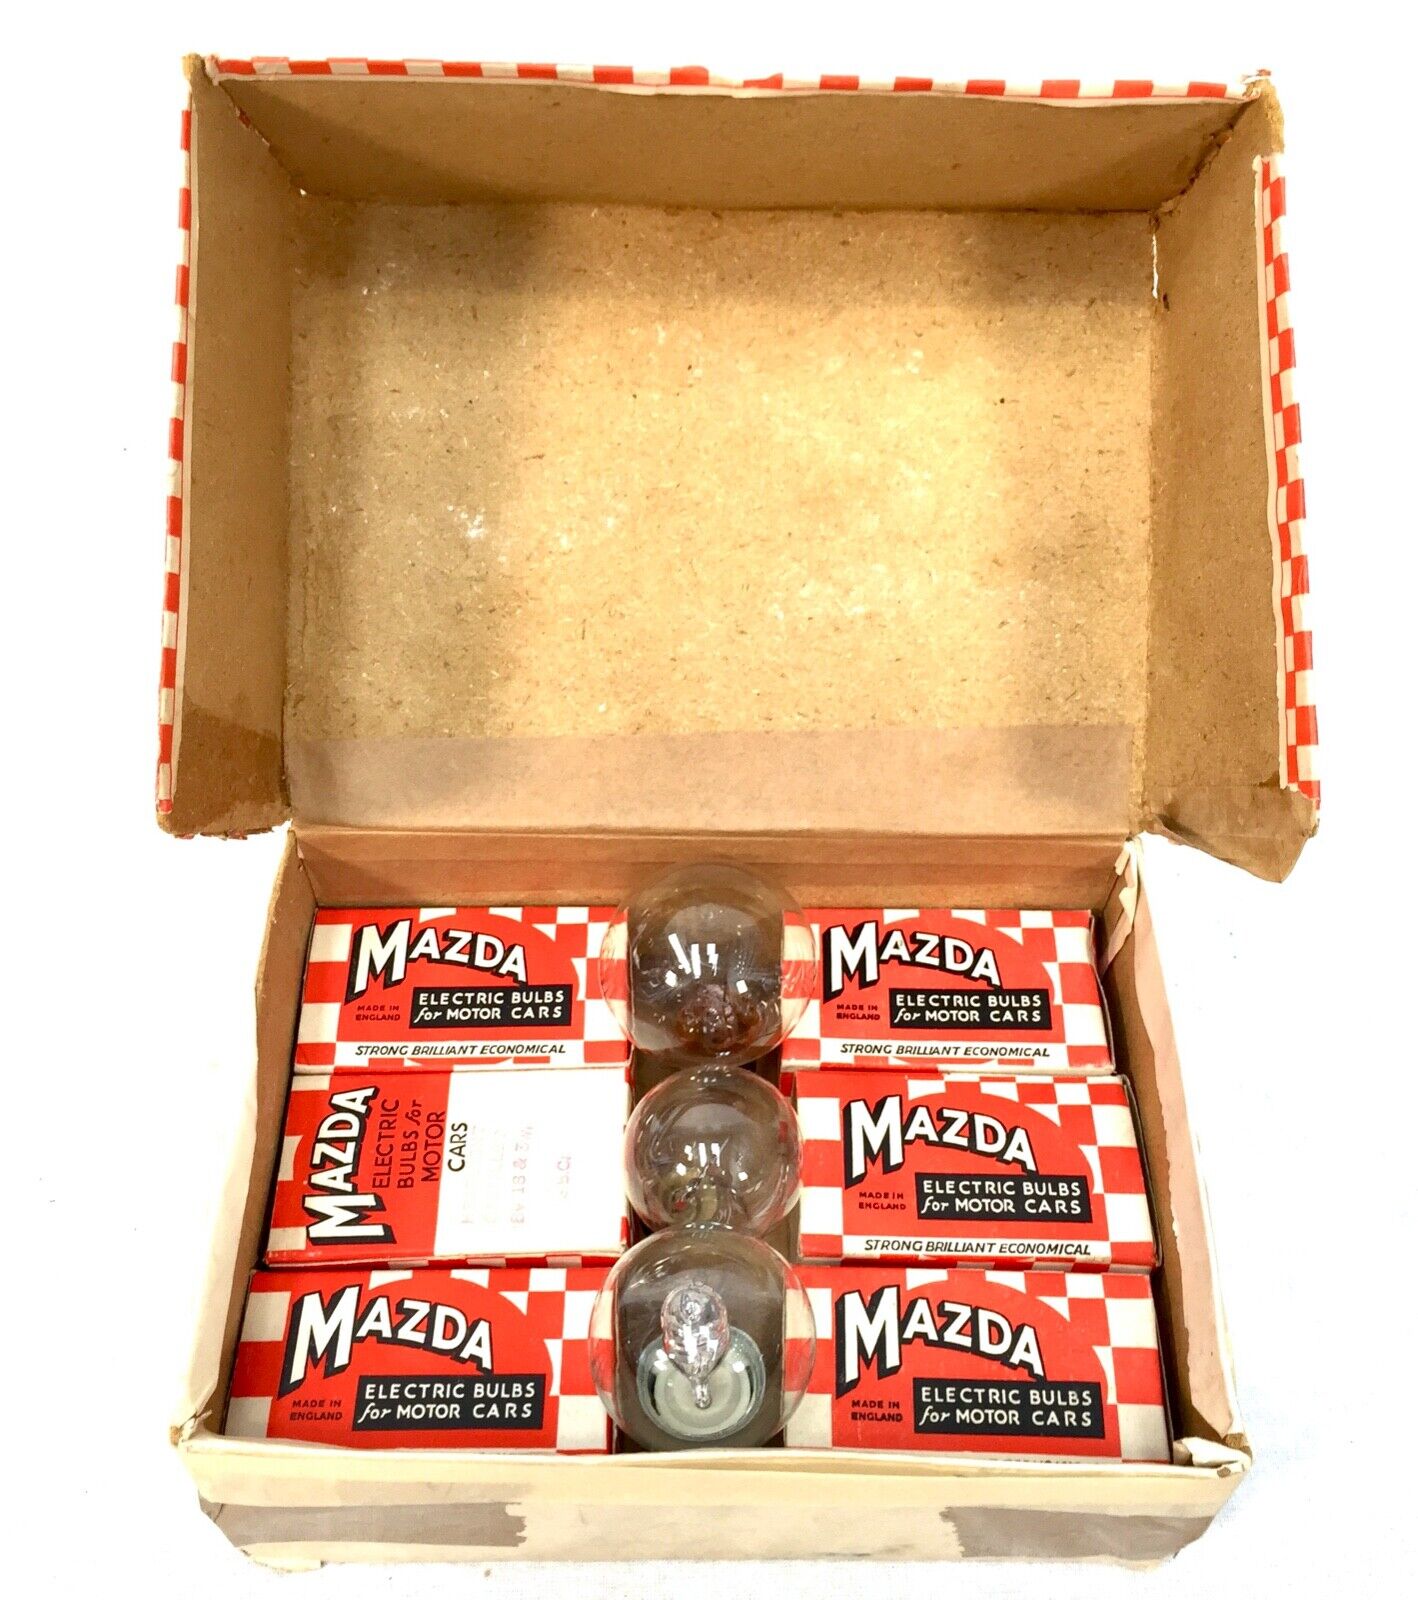 Antique Advertising - Mazda Electric Bulbs for Motor Cars / Vehicles Set in Box